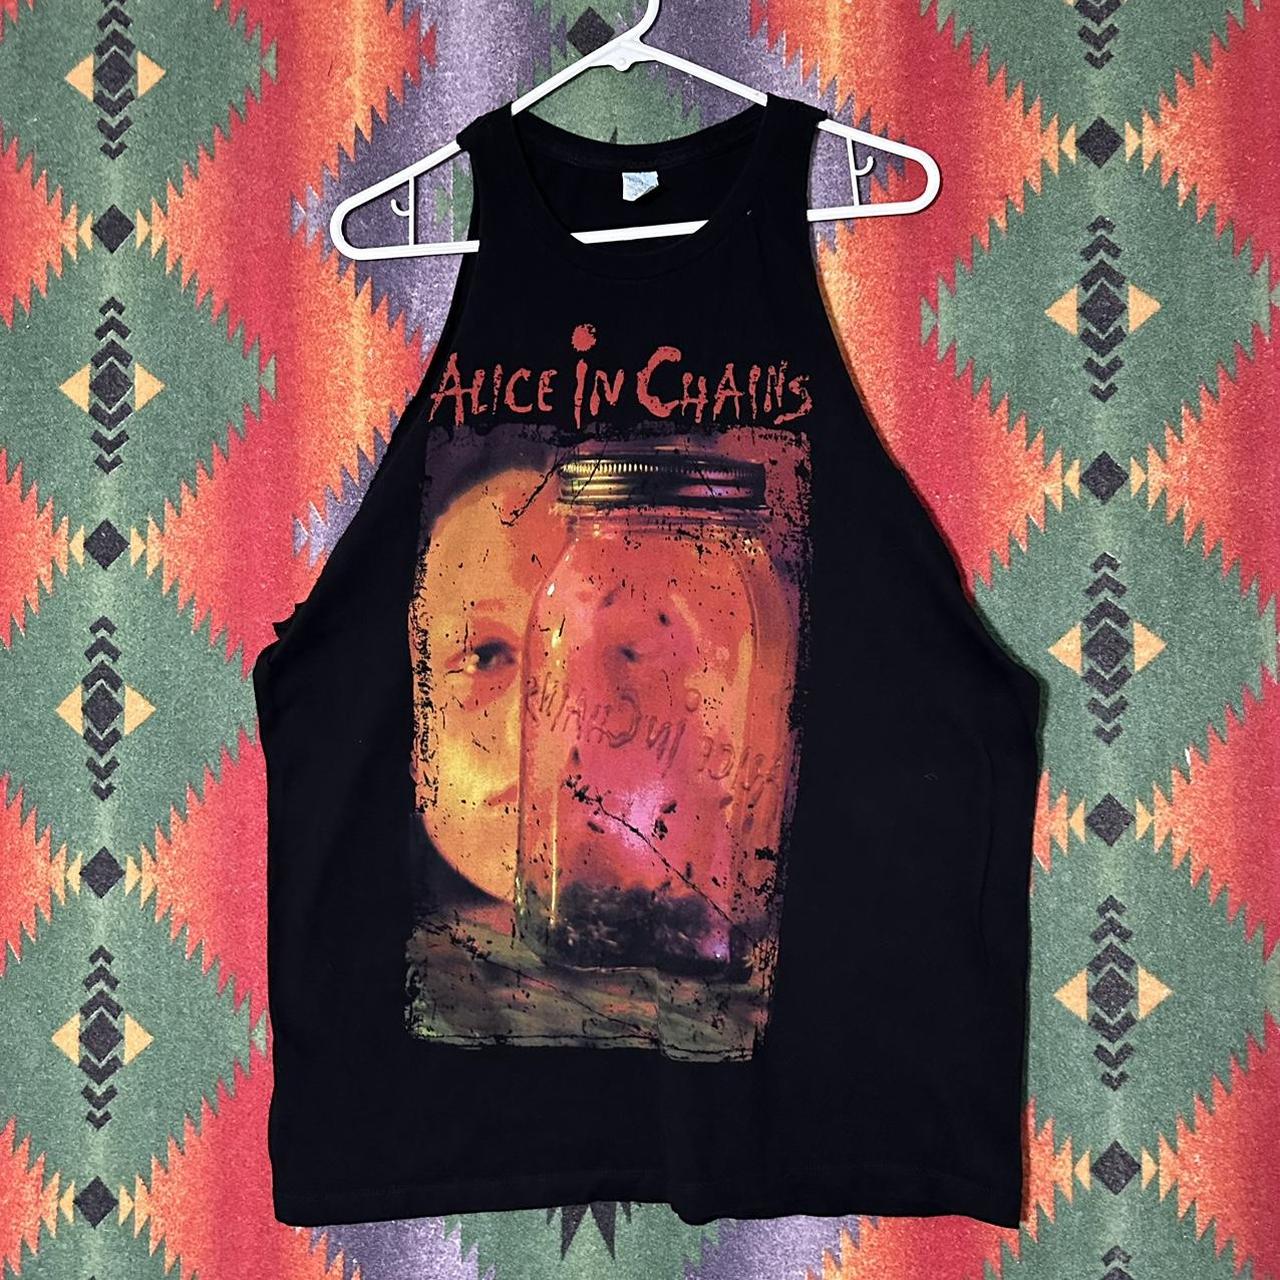 Alice in Chains - Jar of Flies - T-Shirt